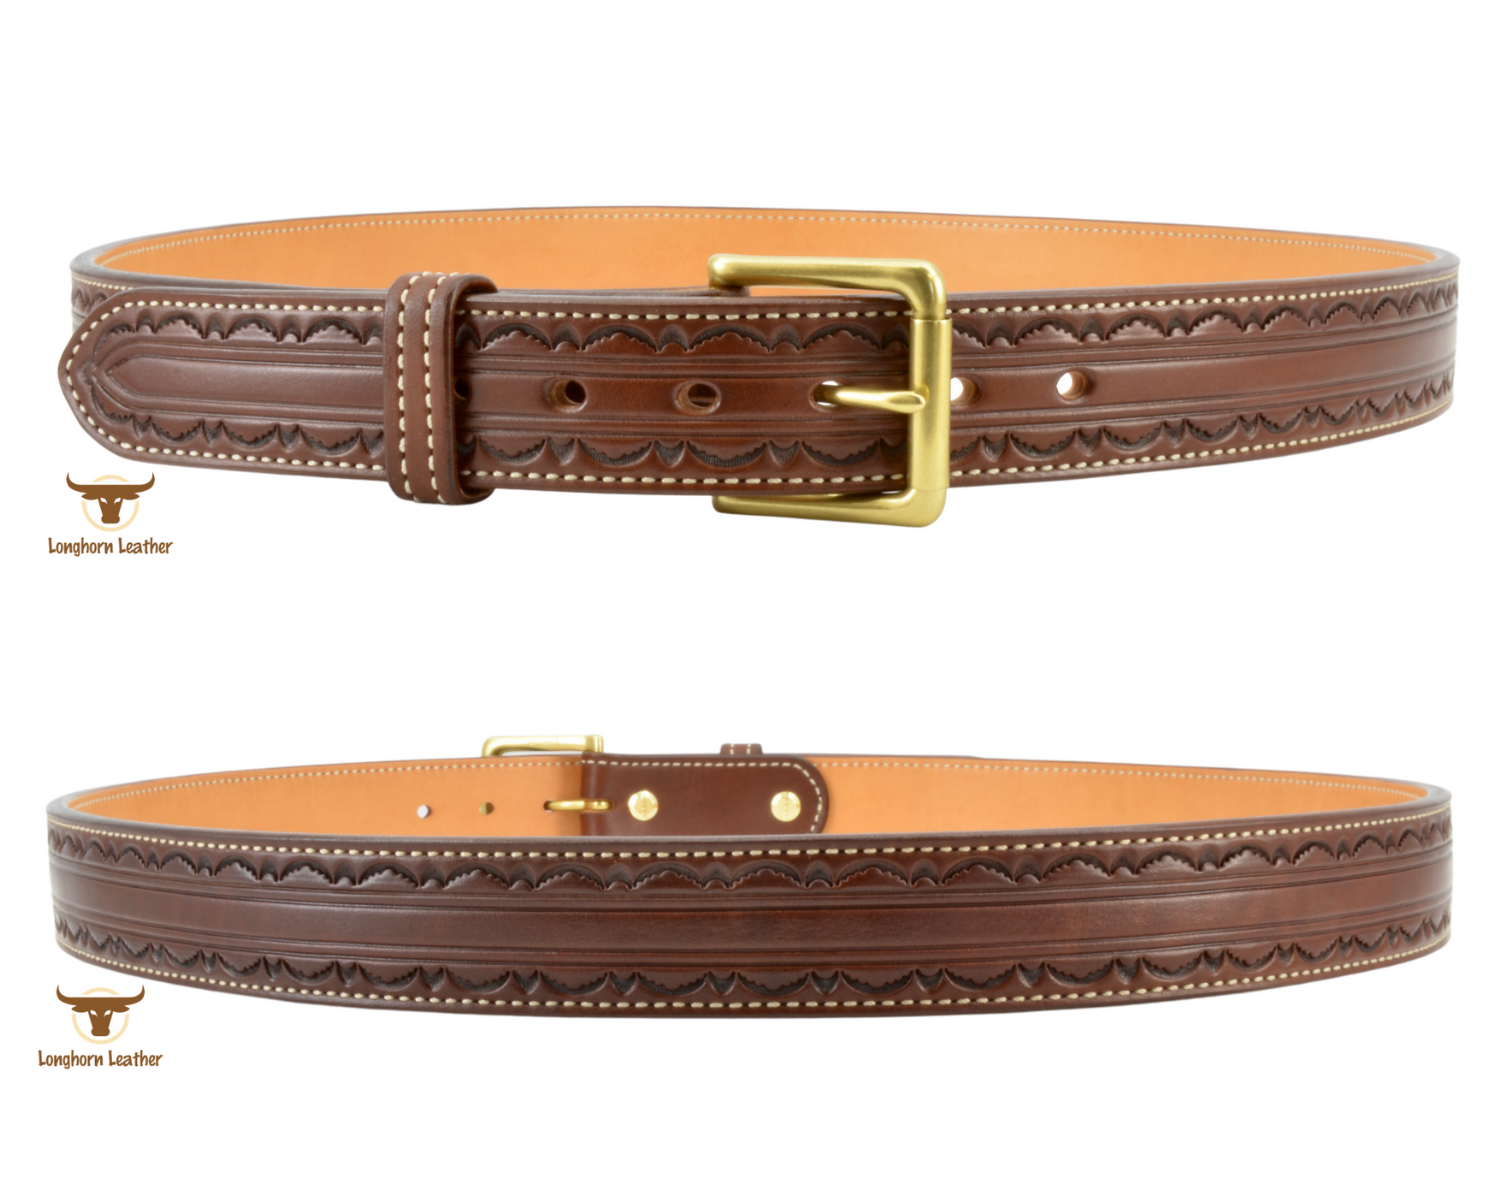 Custom leather belt featuring the "Rio Verde" design.  Individually handcrafted at Longhorn Leather AZ